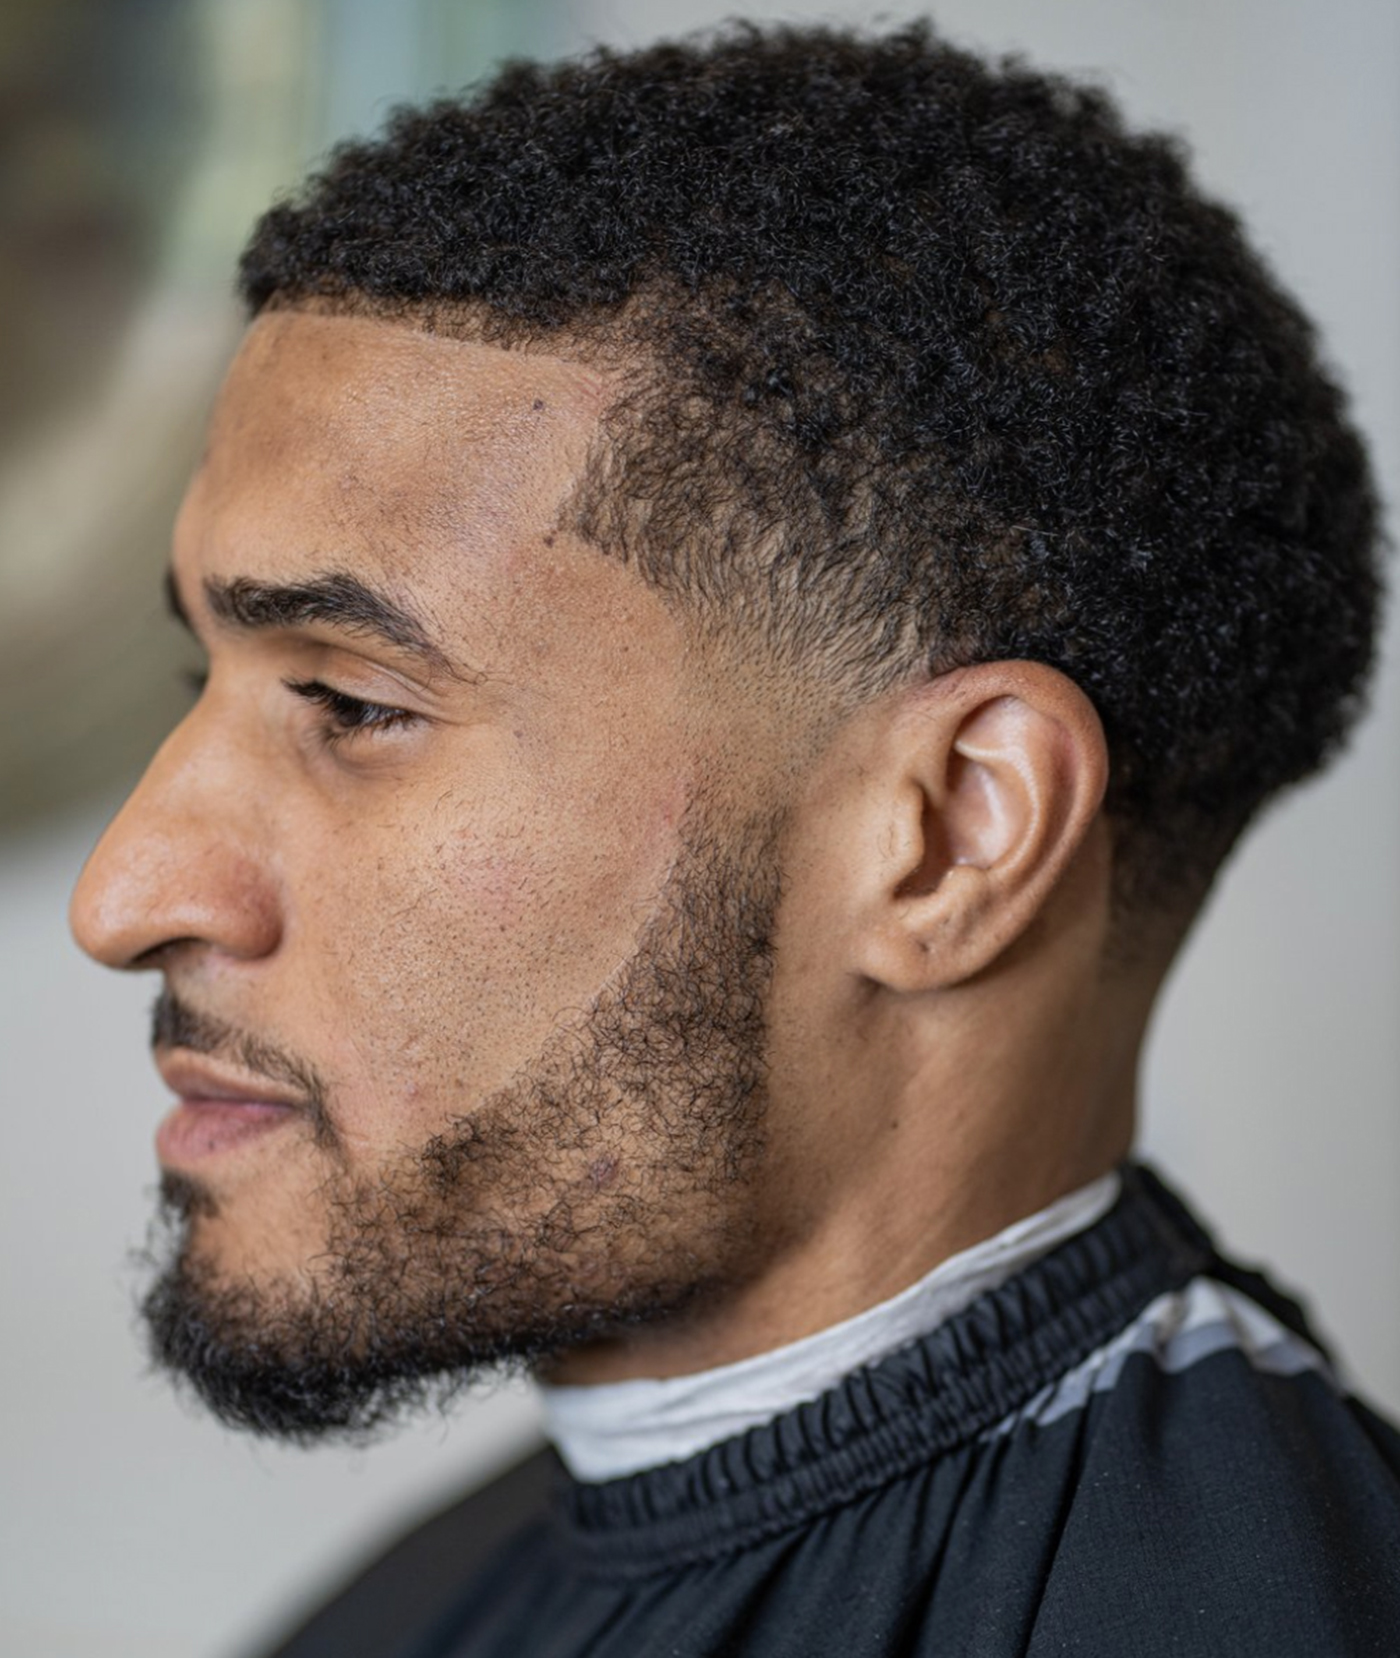 Golden State Warriors basketball player Gary Payton II is a regular client to Dapper Down’s and has been quoted, &quot;Top of the line service from Bryce, everything you need in one place. Never leave unsatisfied. Dapper Down is A1.&quot;